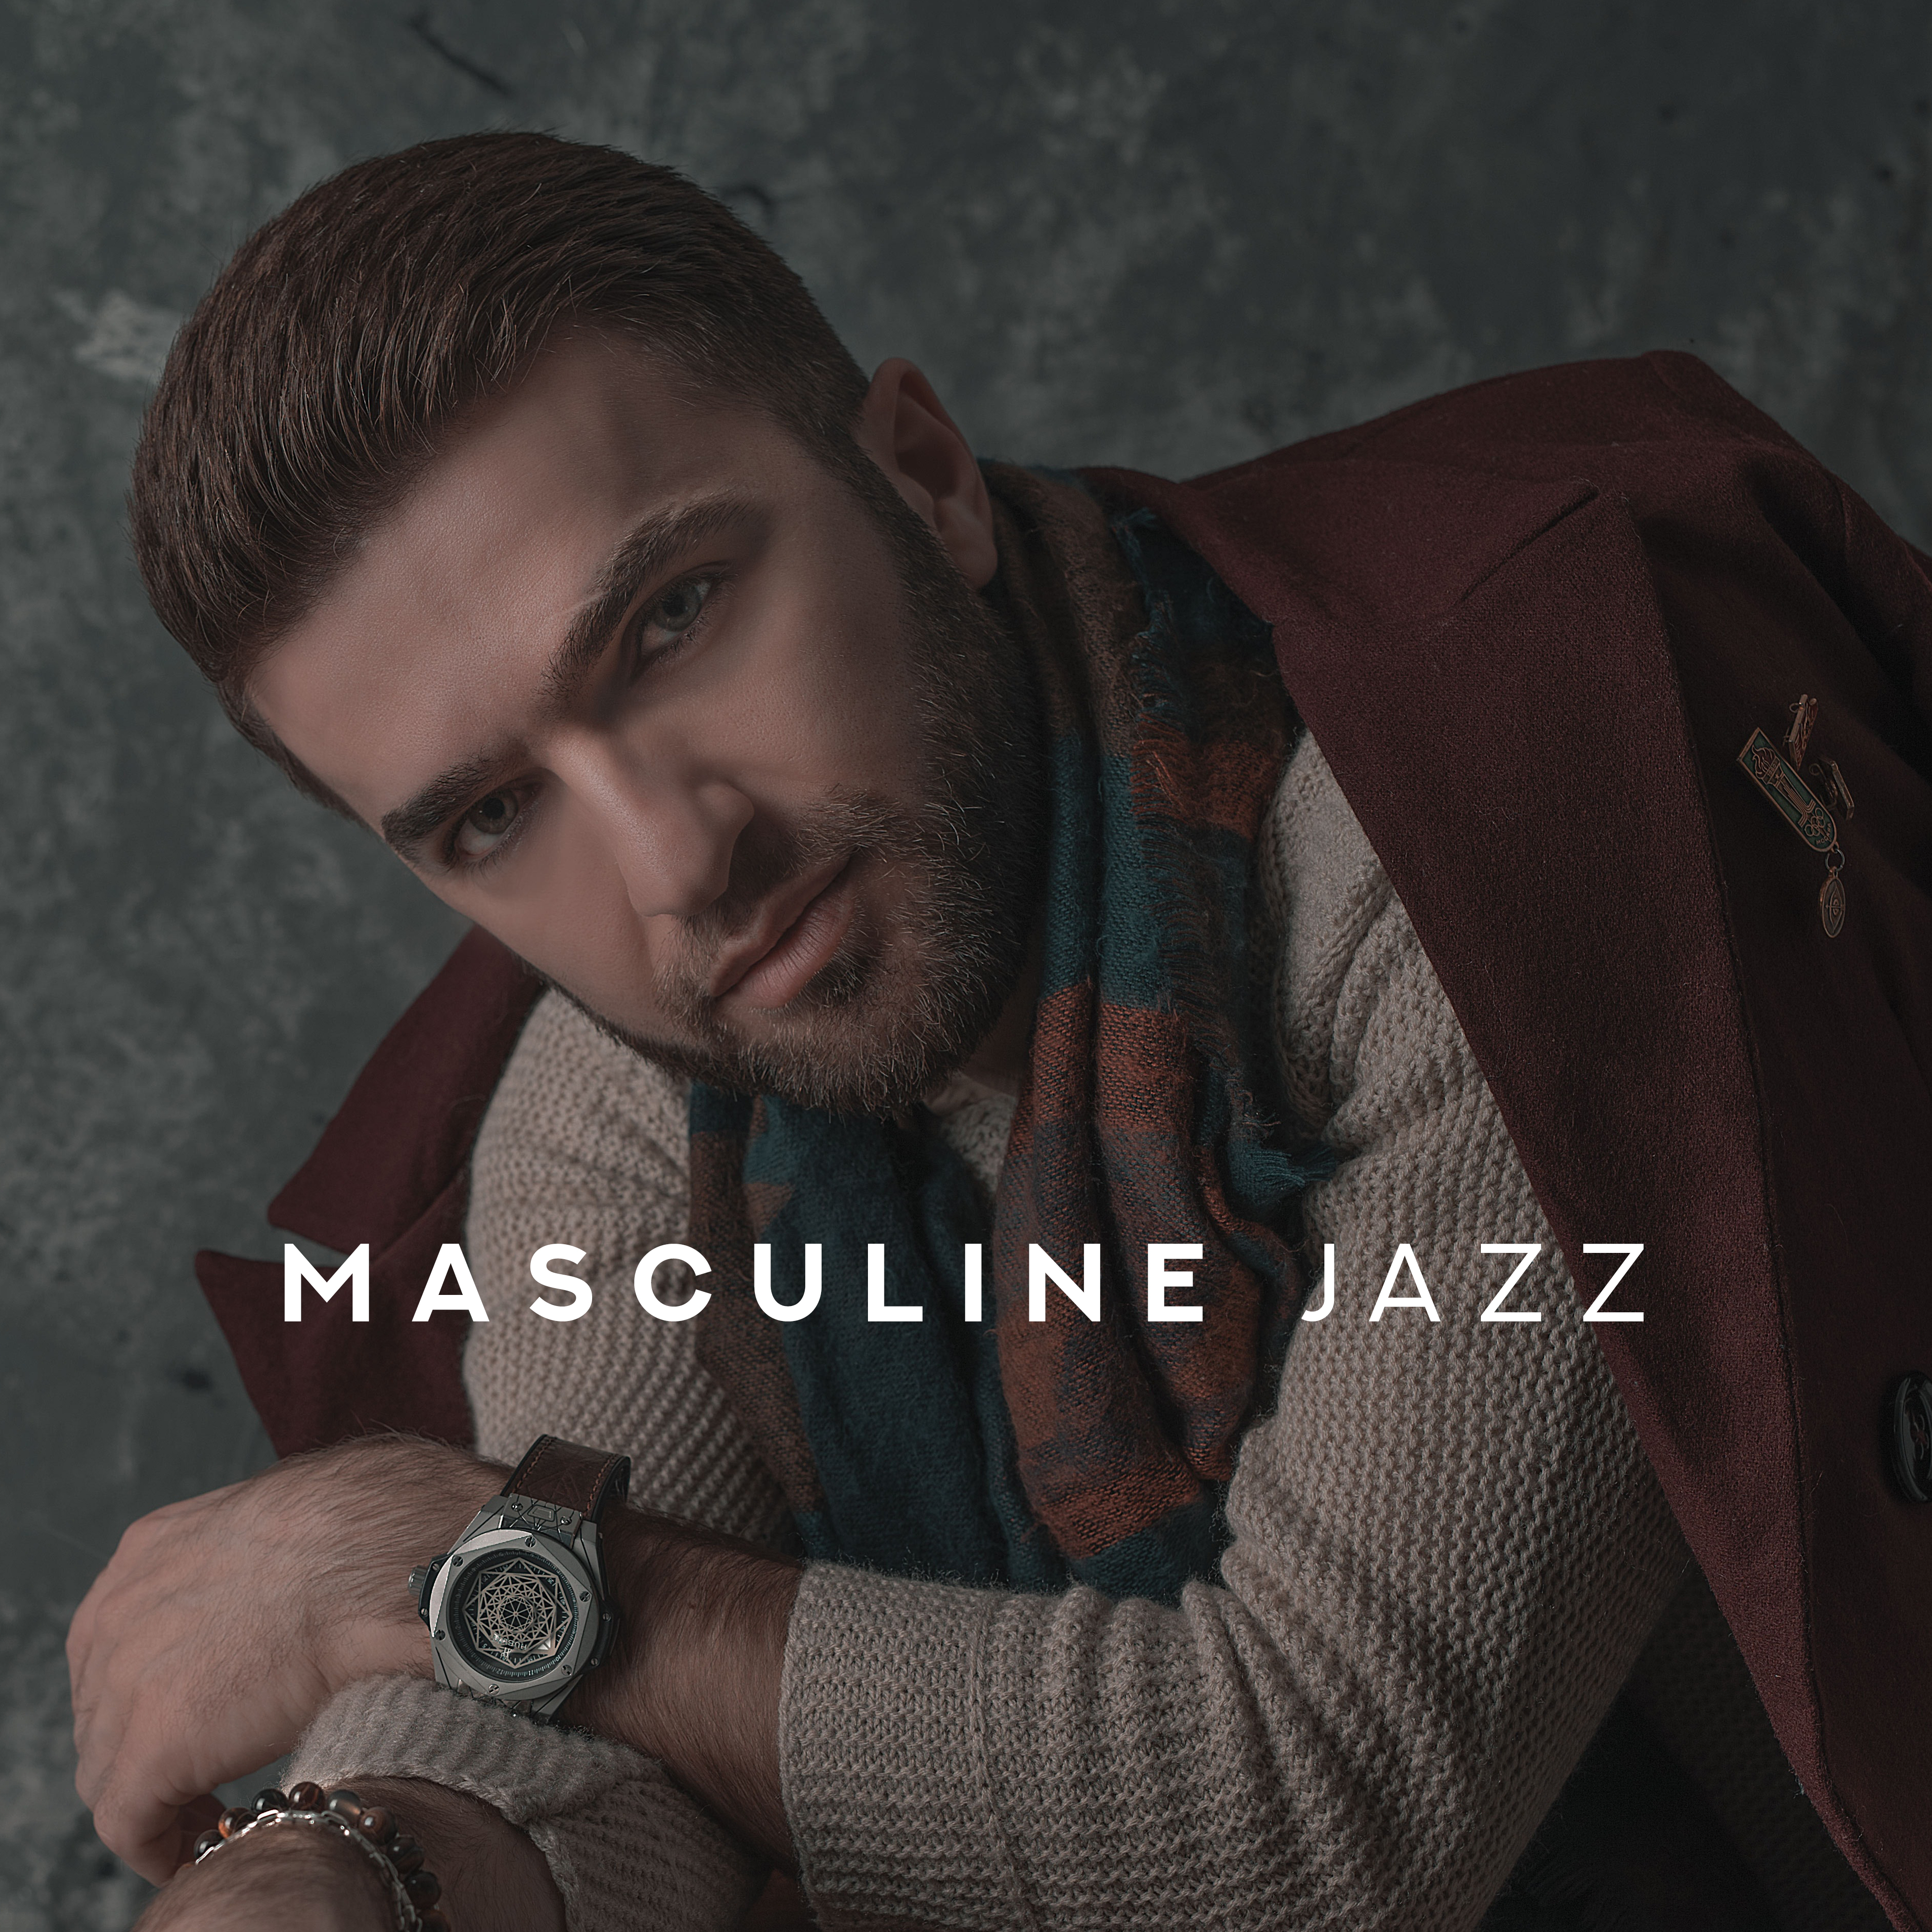 Masculine Jazz - Return to the Roots of Jazz